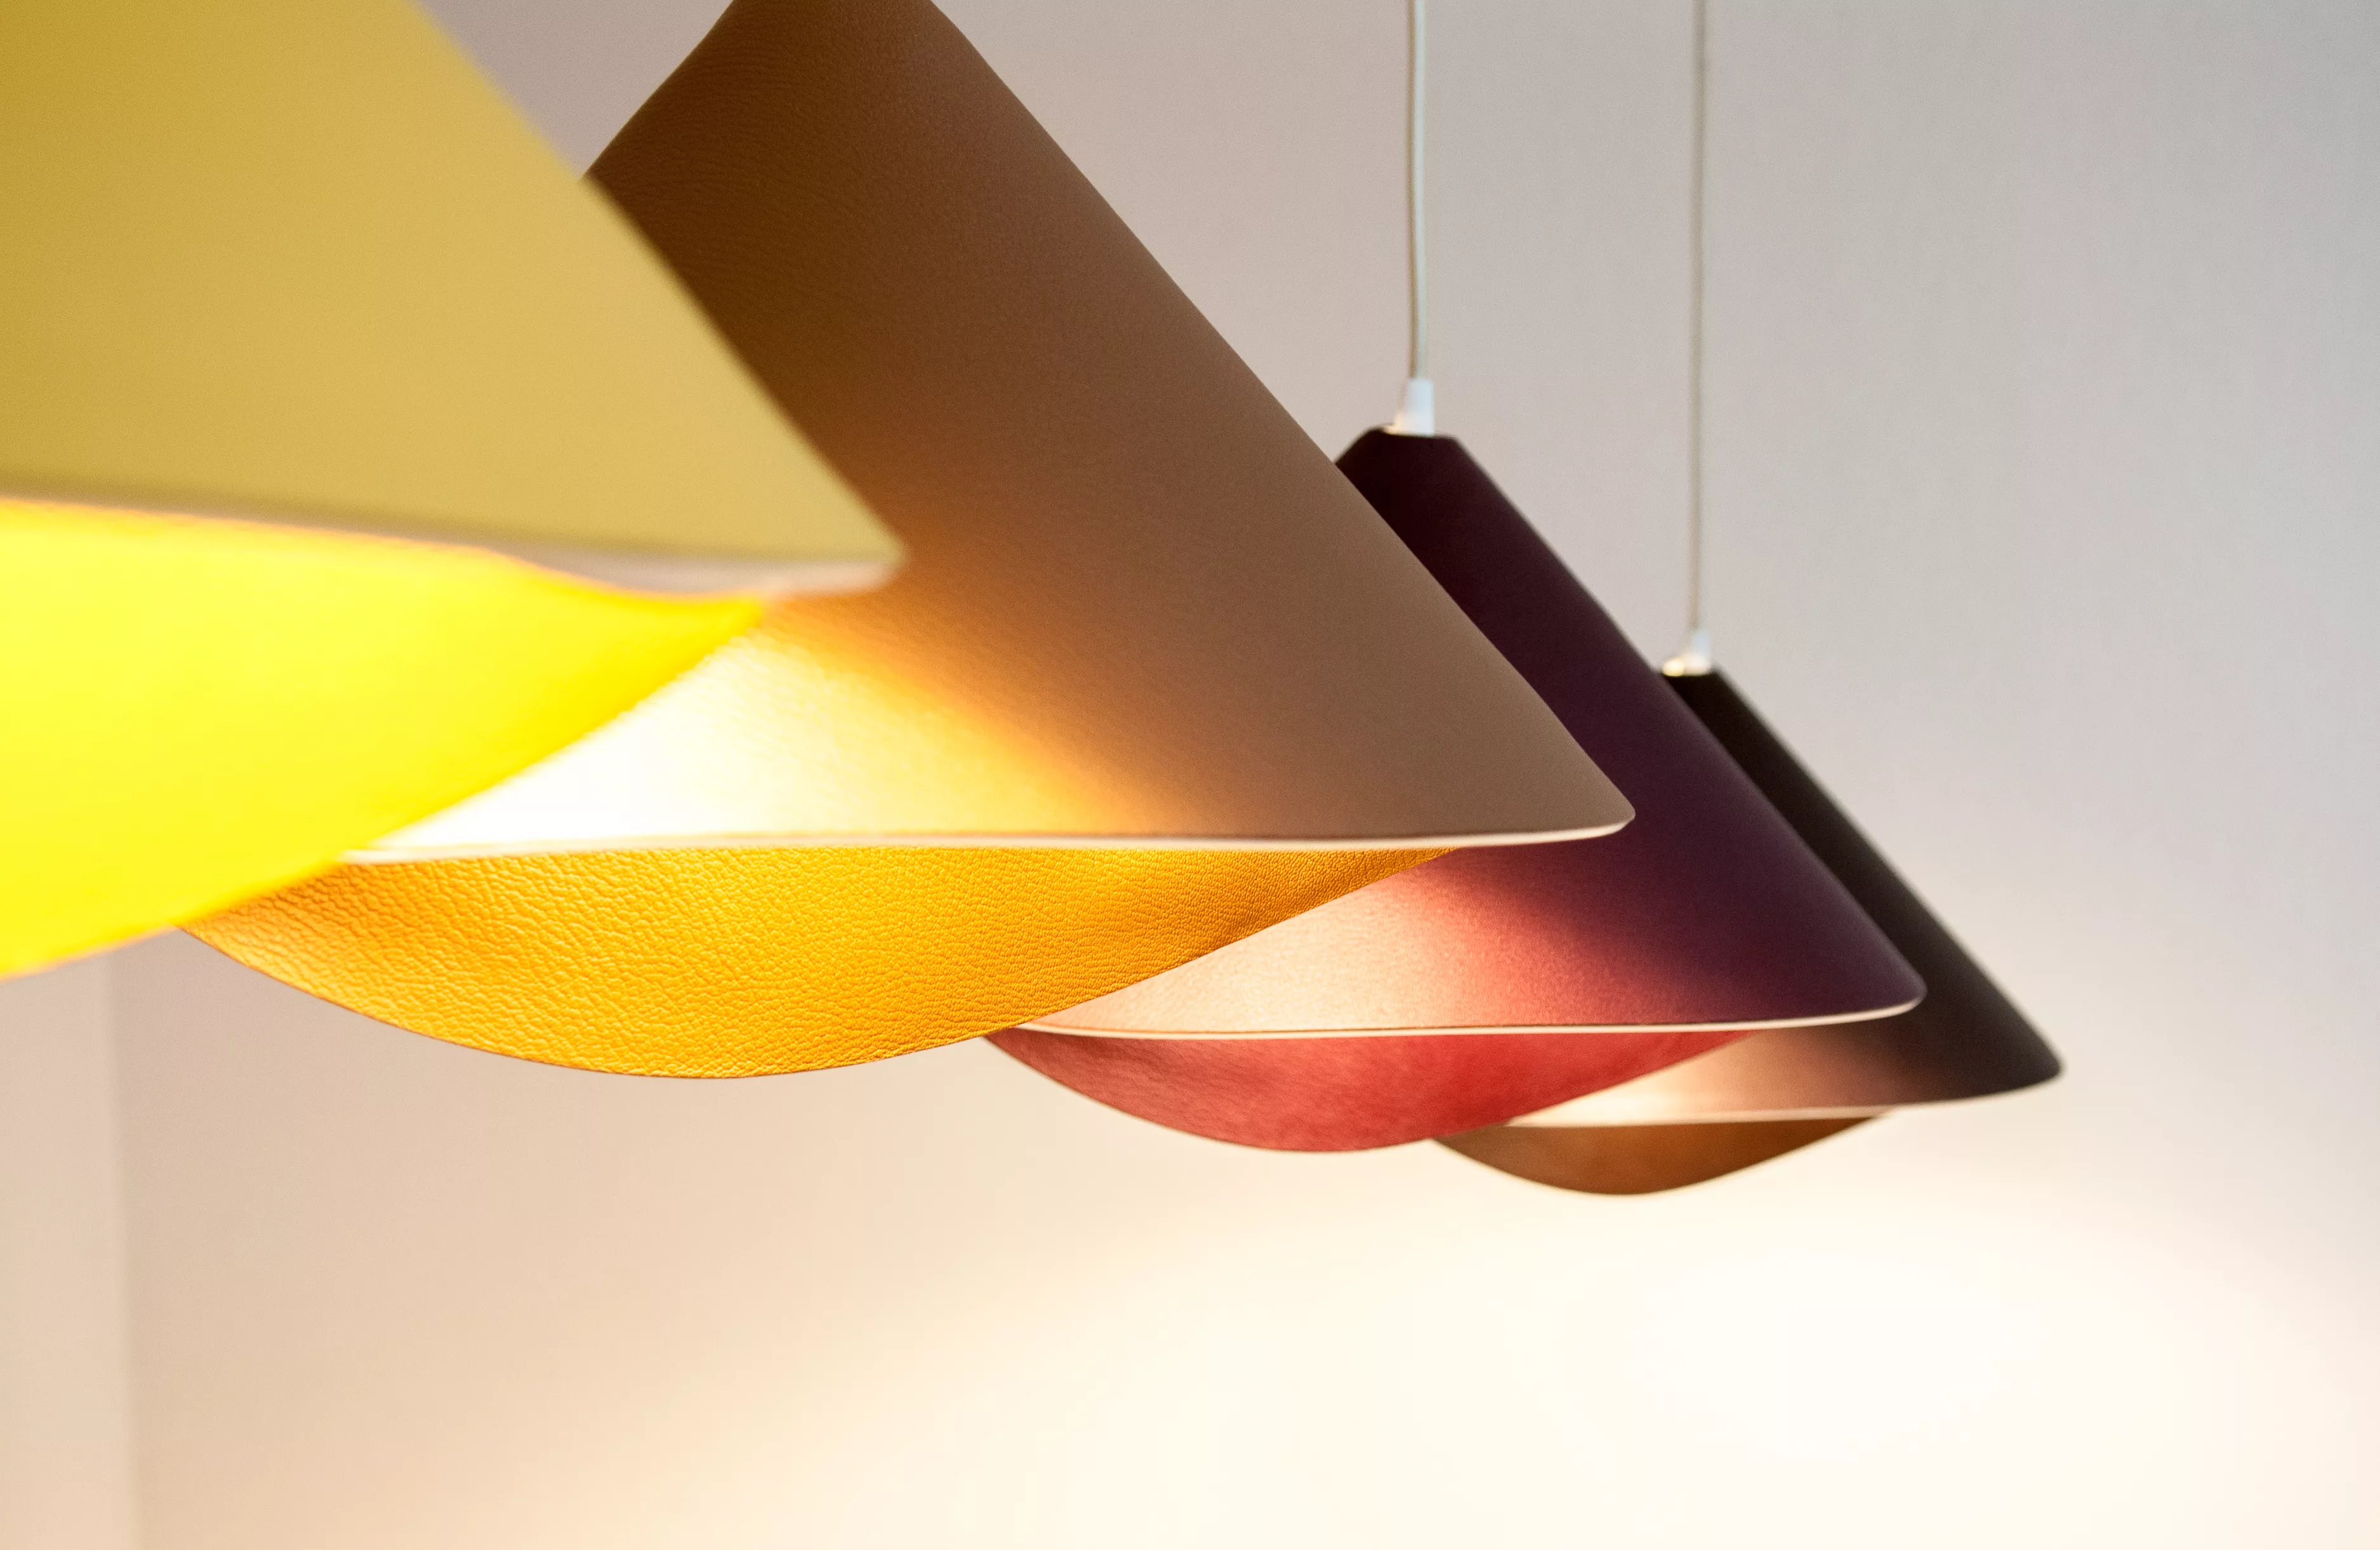 HIMACS: The return of the iconic Tulip lamp, with an elegant new pendant version